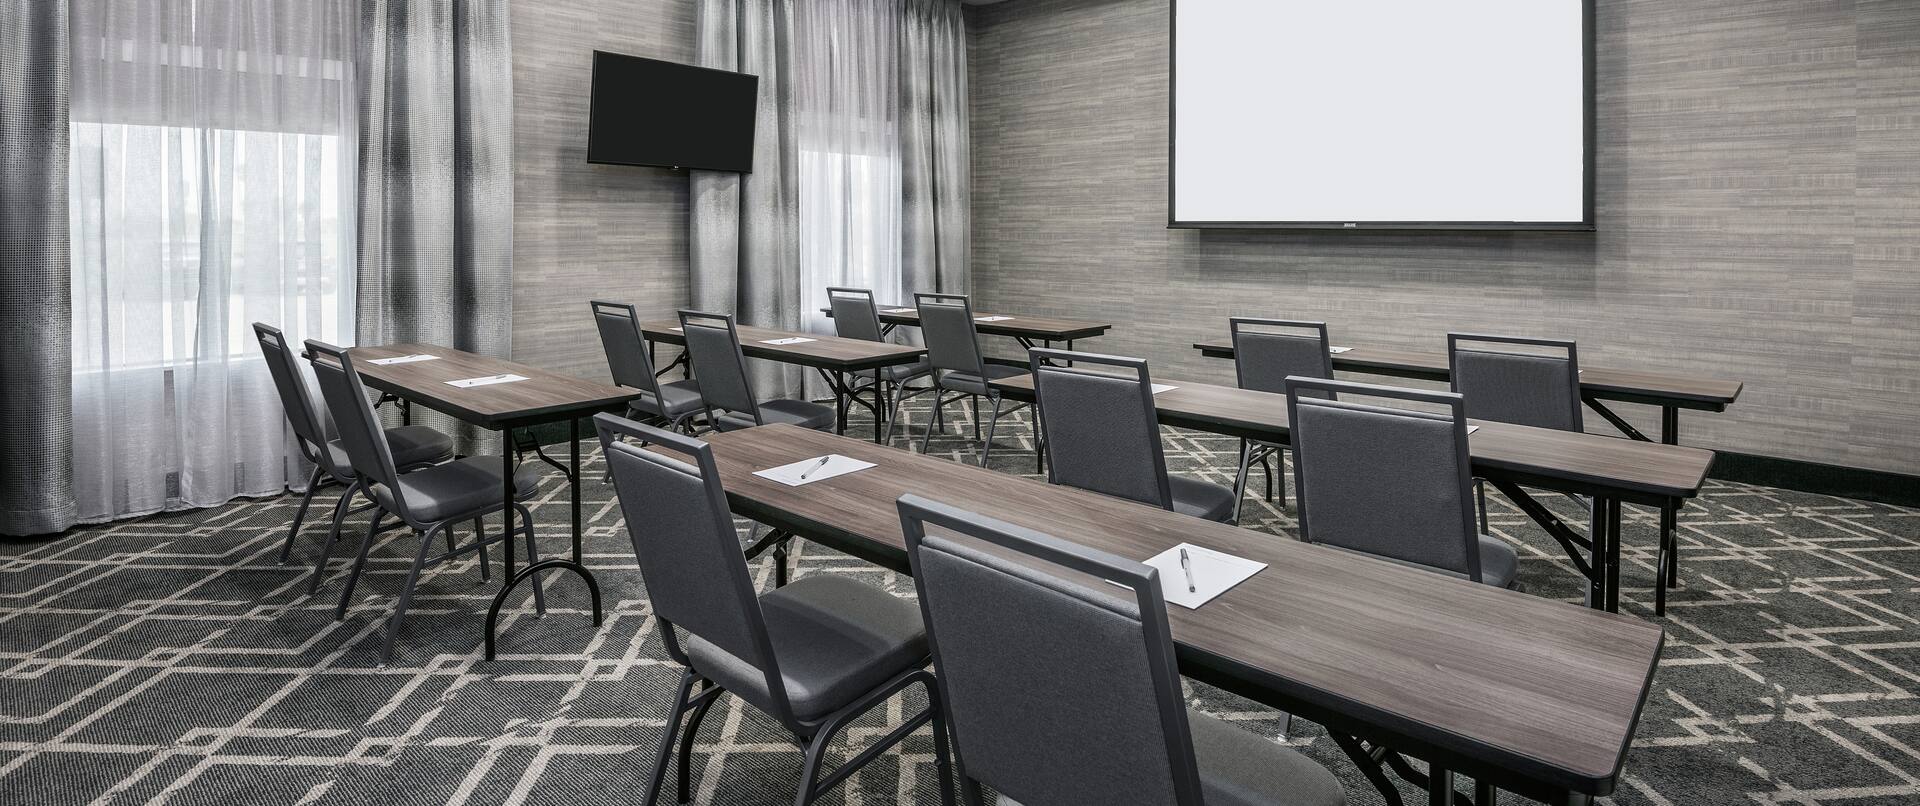 Classroom Set Up Meeting Room with Projection Screen